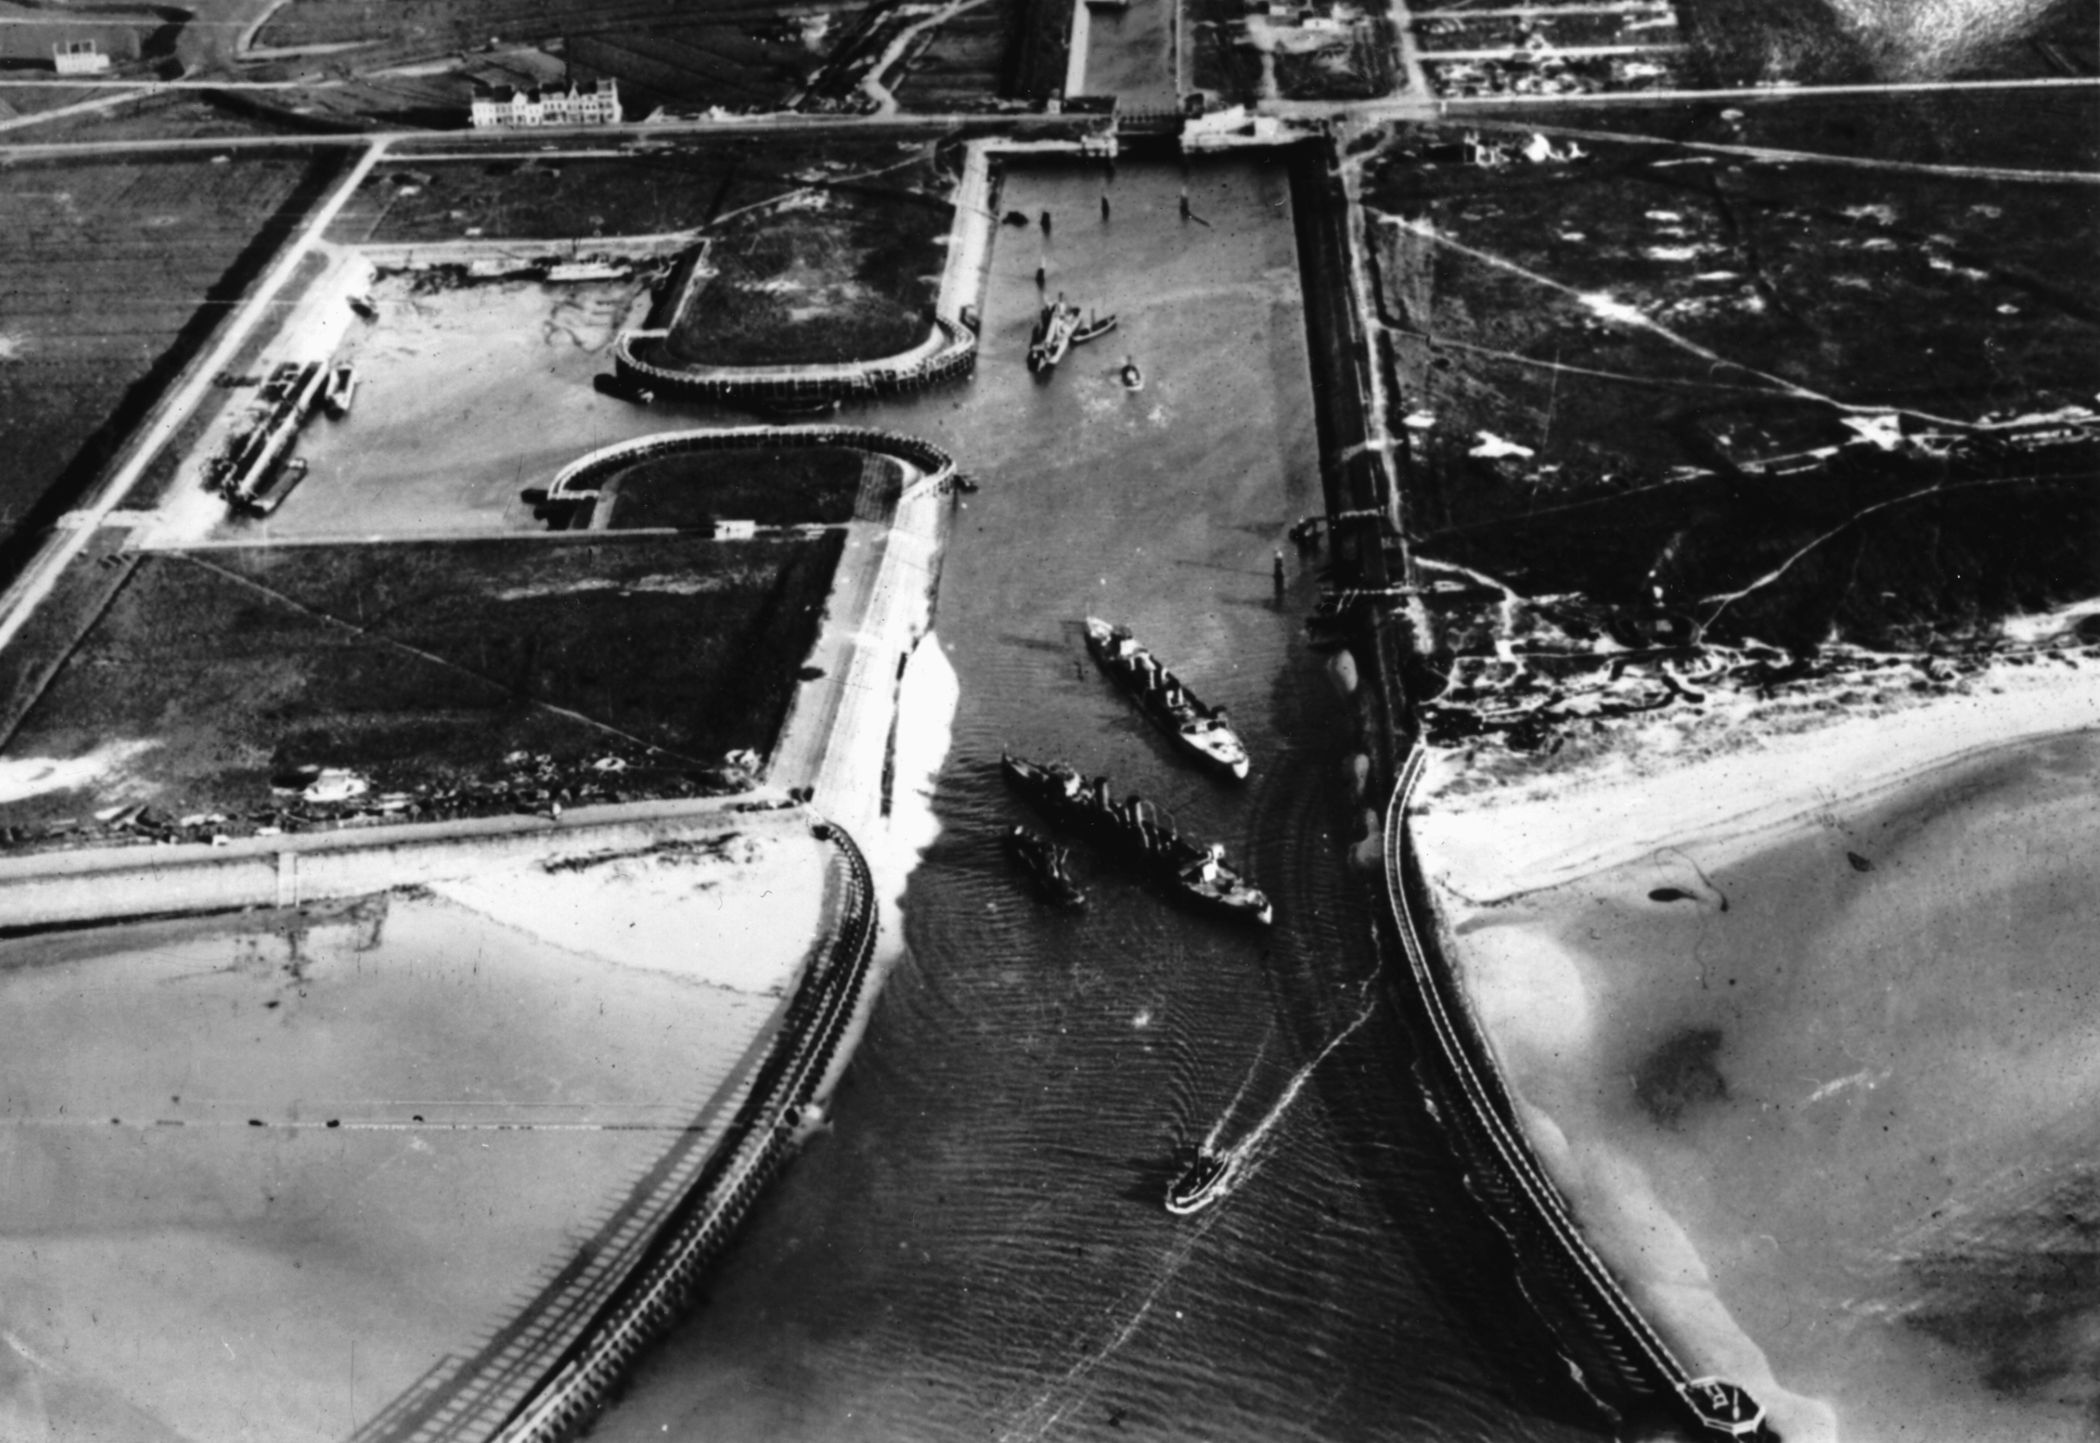 A German aerial photograph shows the damage inflicted on the Belgian port of Zeebrugge following the historic Allied raid. 